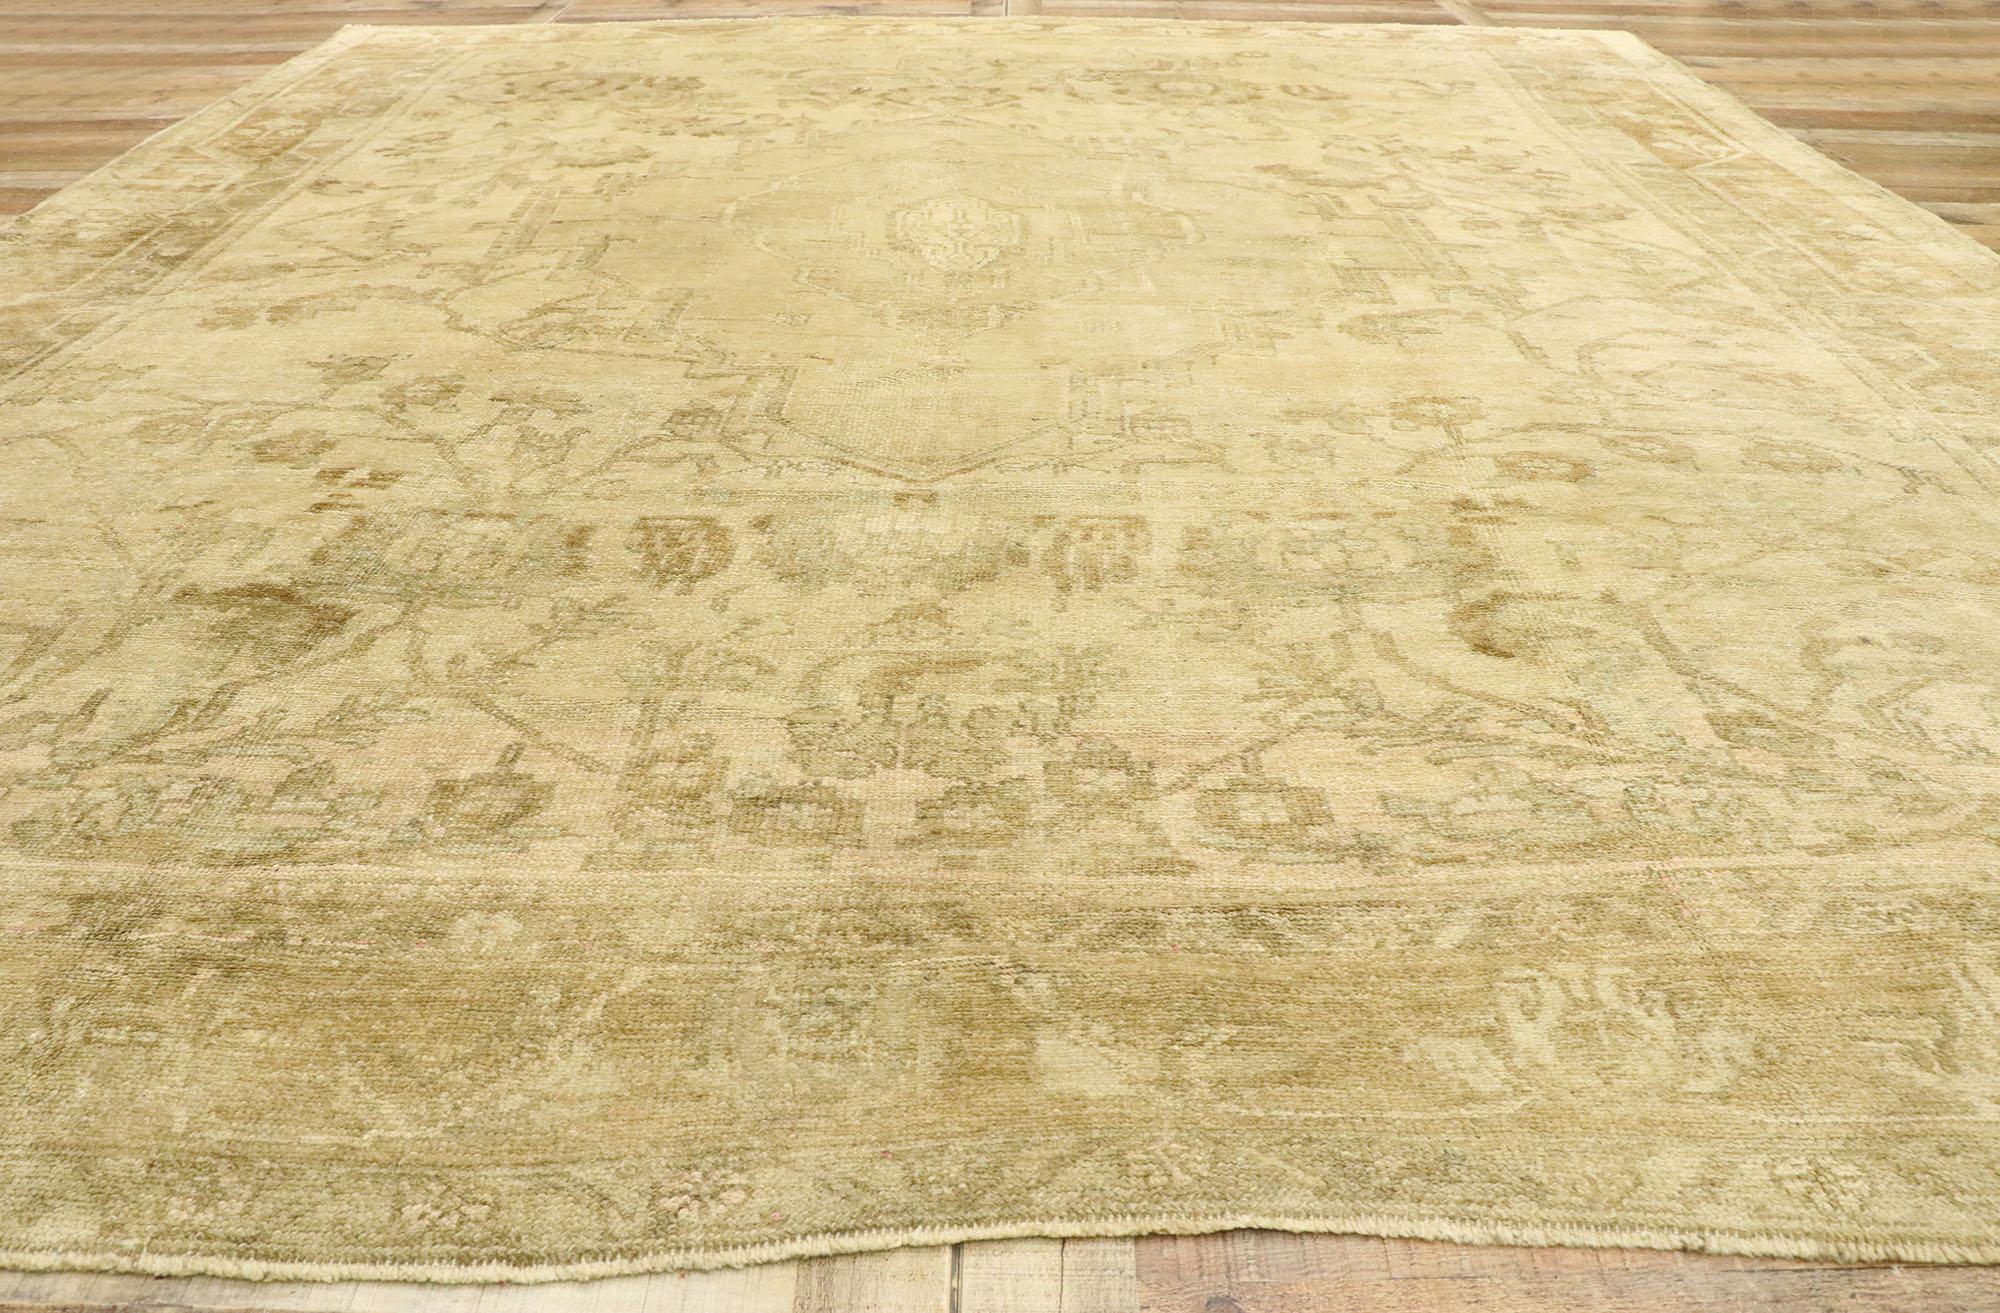 Wool Antique Turkish Oushak Rug with Rustic French Cottage Style For Sale